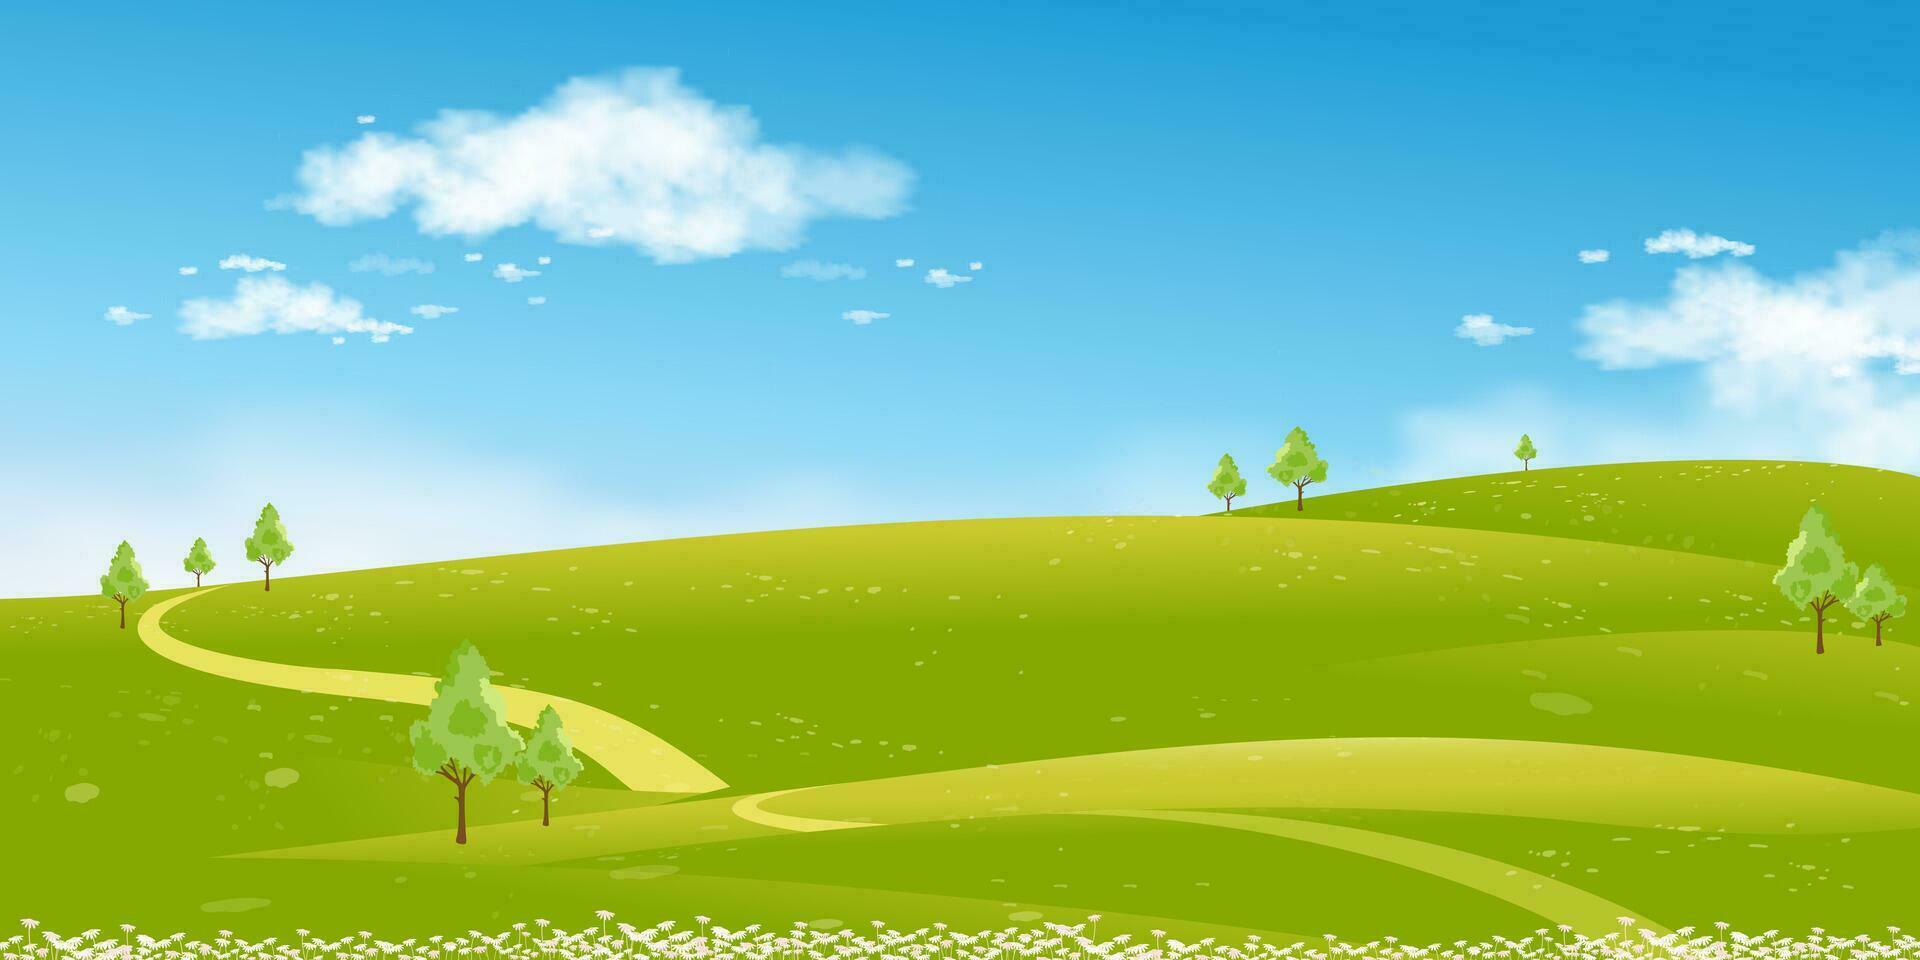 Spring Landscape Green fields,Mountain,Blue Sky and Clouds Background,Horizon peaceful rural nature Sunny day Summer with grass land.Cartoon Vector illustration for Spring and Summer banner